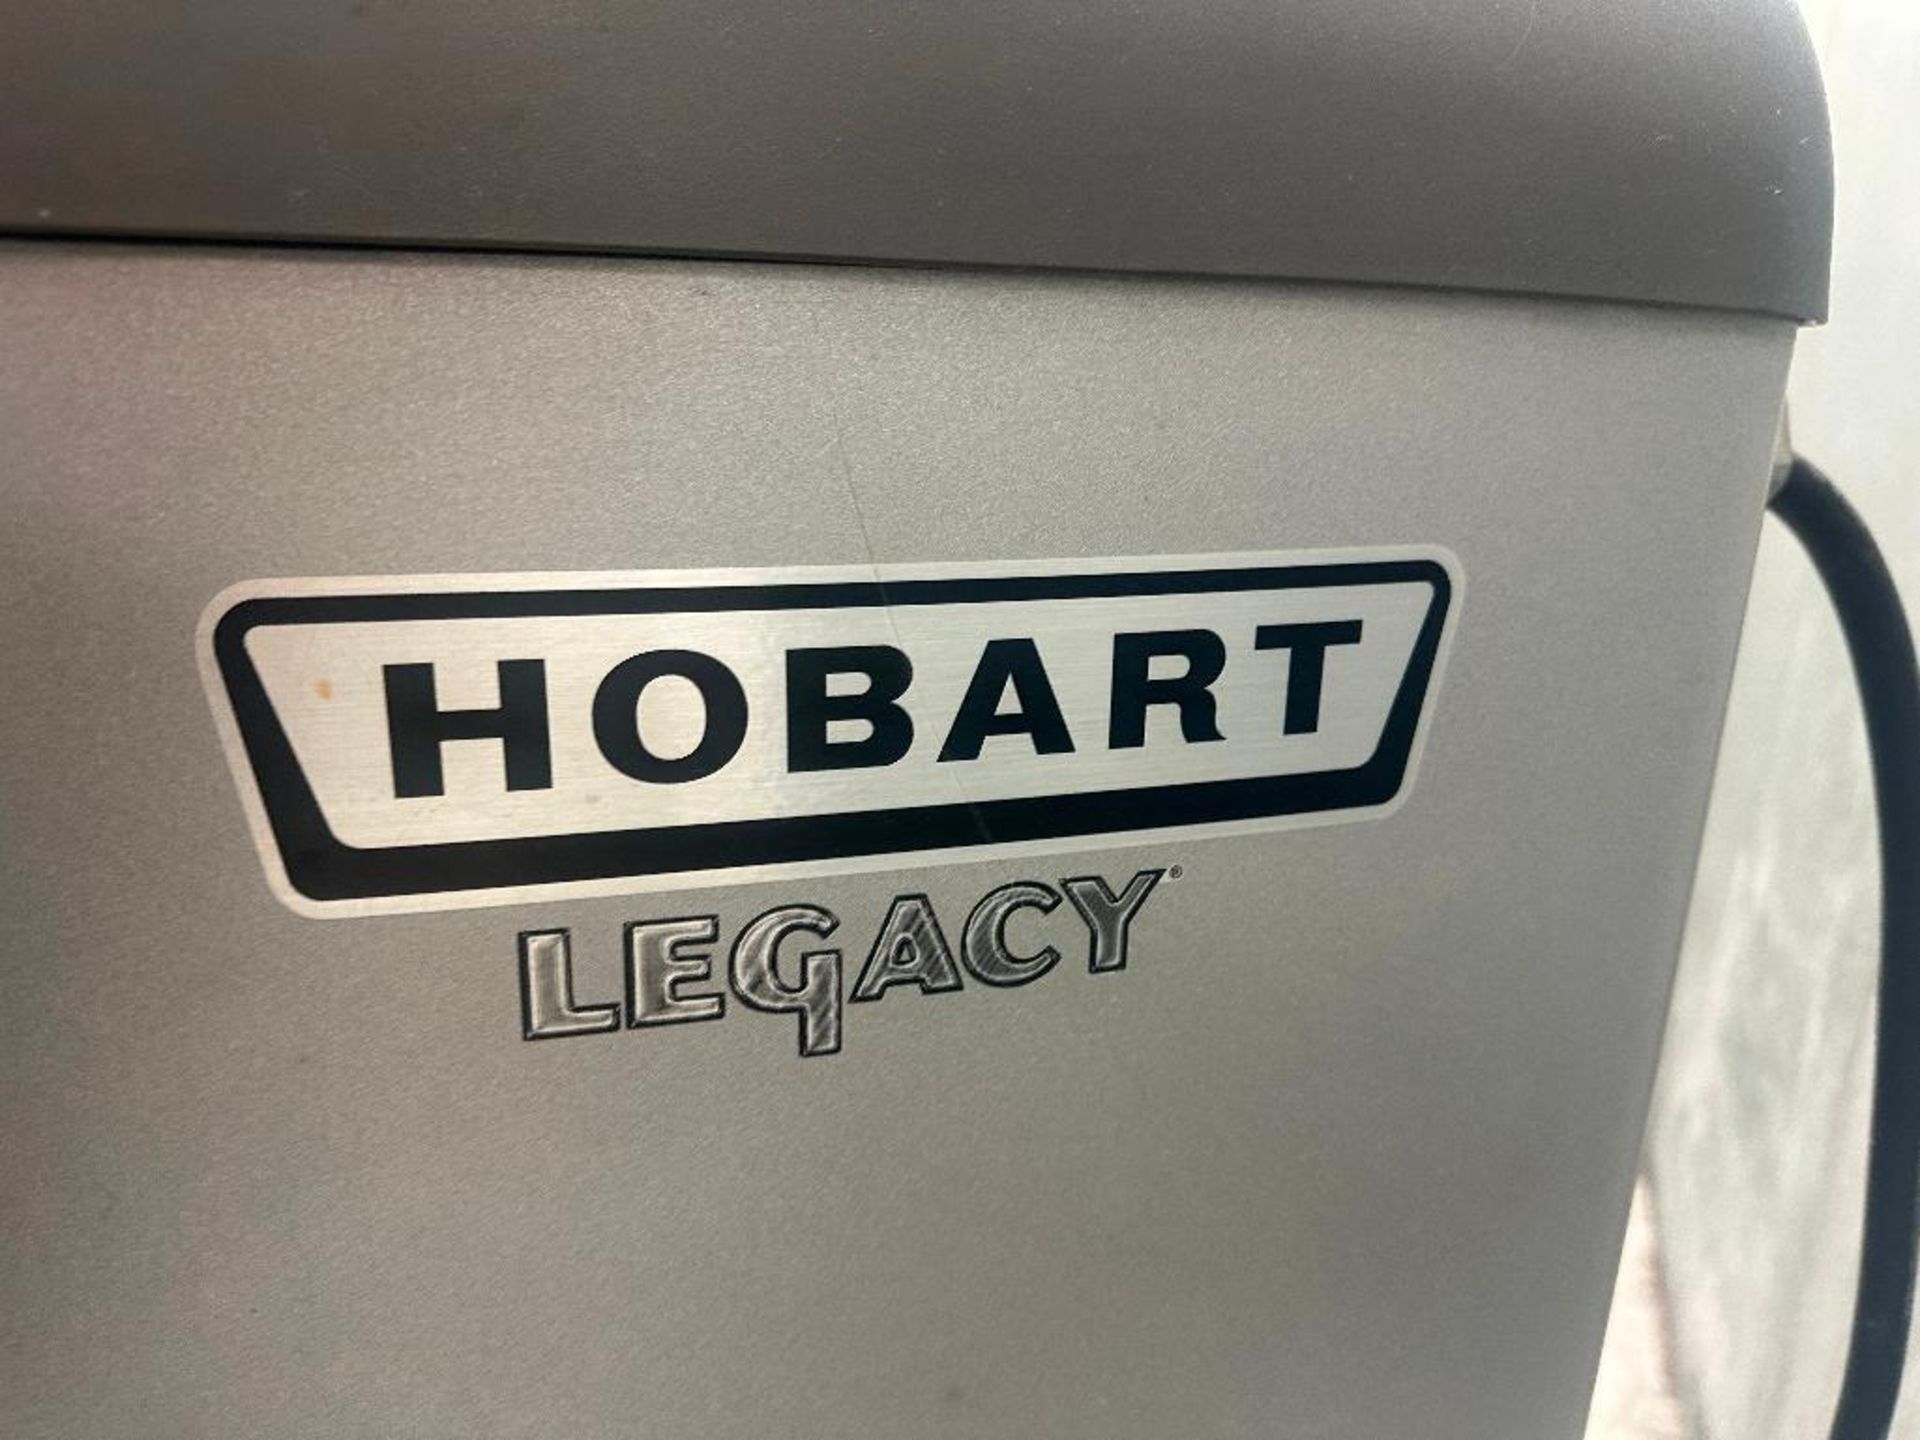 DESCRIPTION HOBART 60 QT LEGACY MIXER W/ BOWL, DOLLY, PADDLE, AND HOOK. RETAIL NEW FOR $26K BRAND / - Image 5 of 6